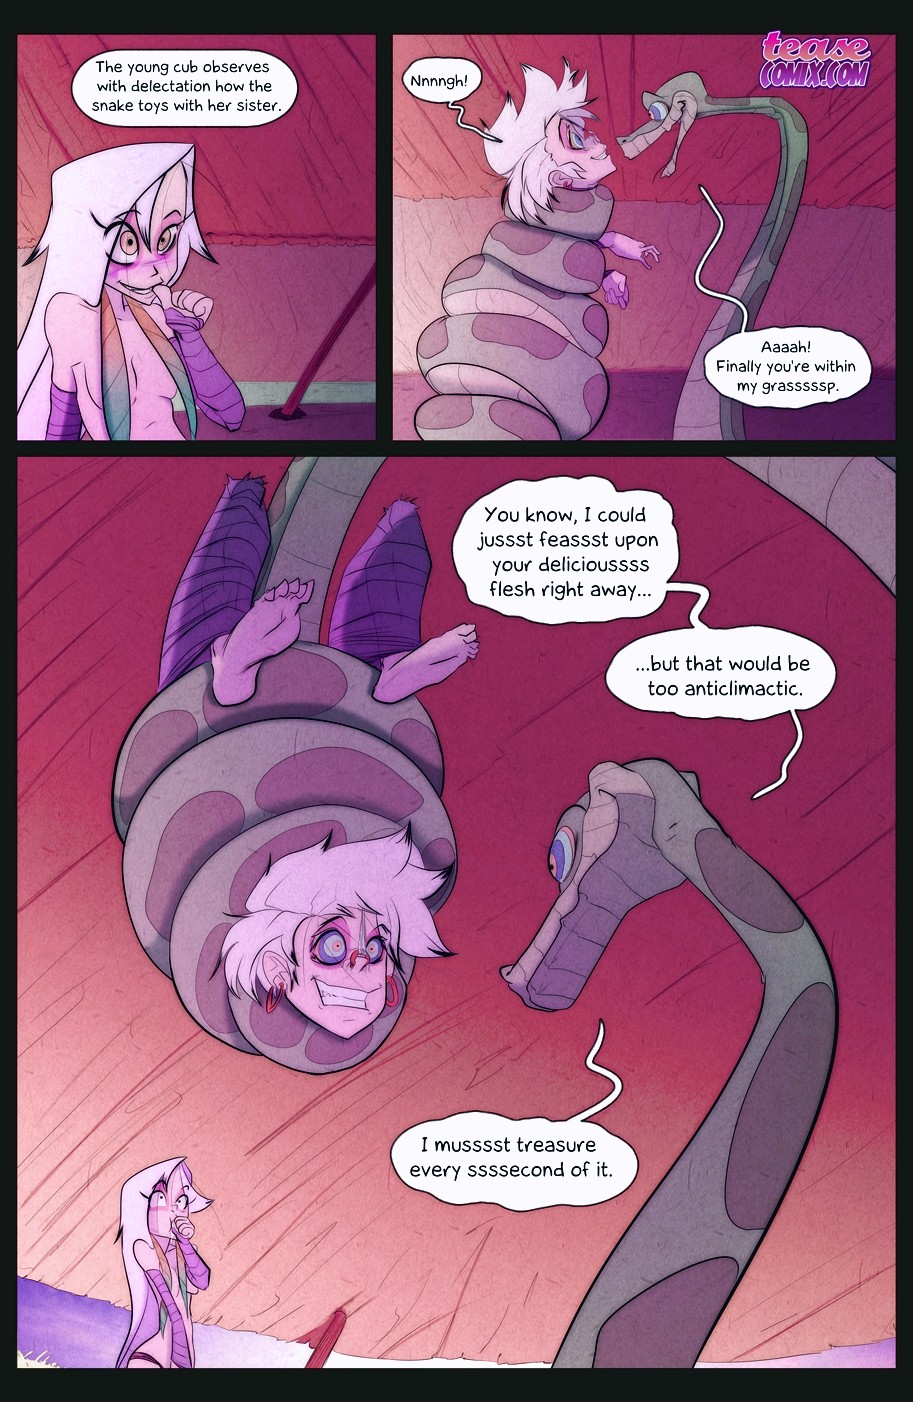 The Snake and The Girl 5 page 06